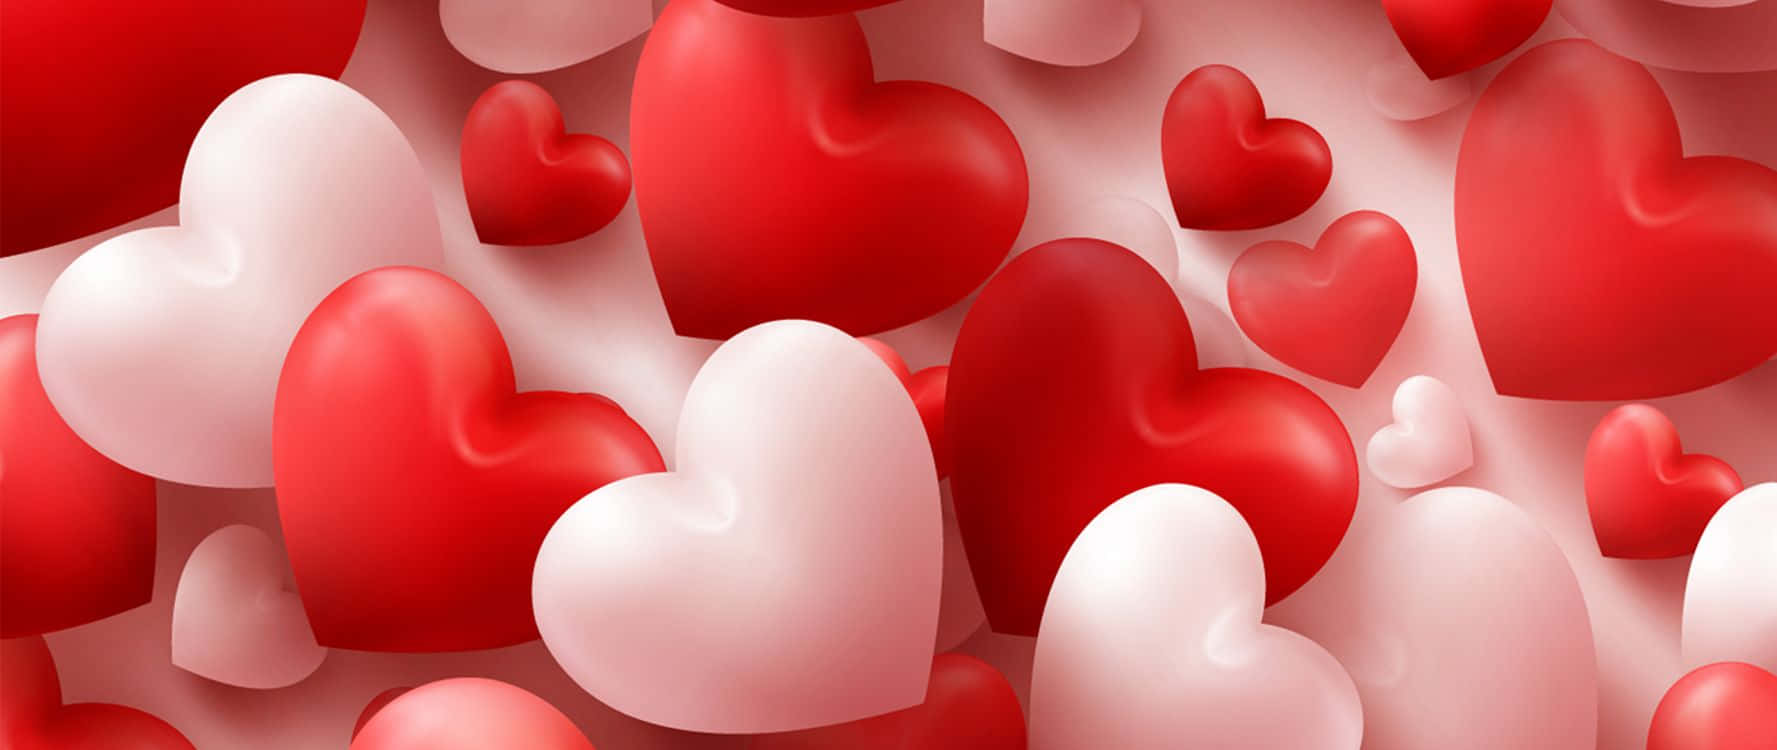 A Radiant Display of Colorful Cute Hearts Wallpaper